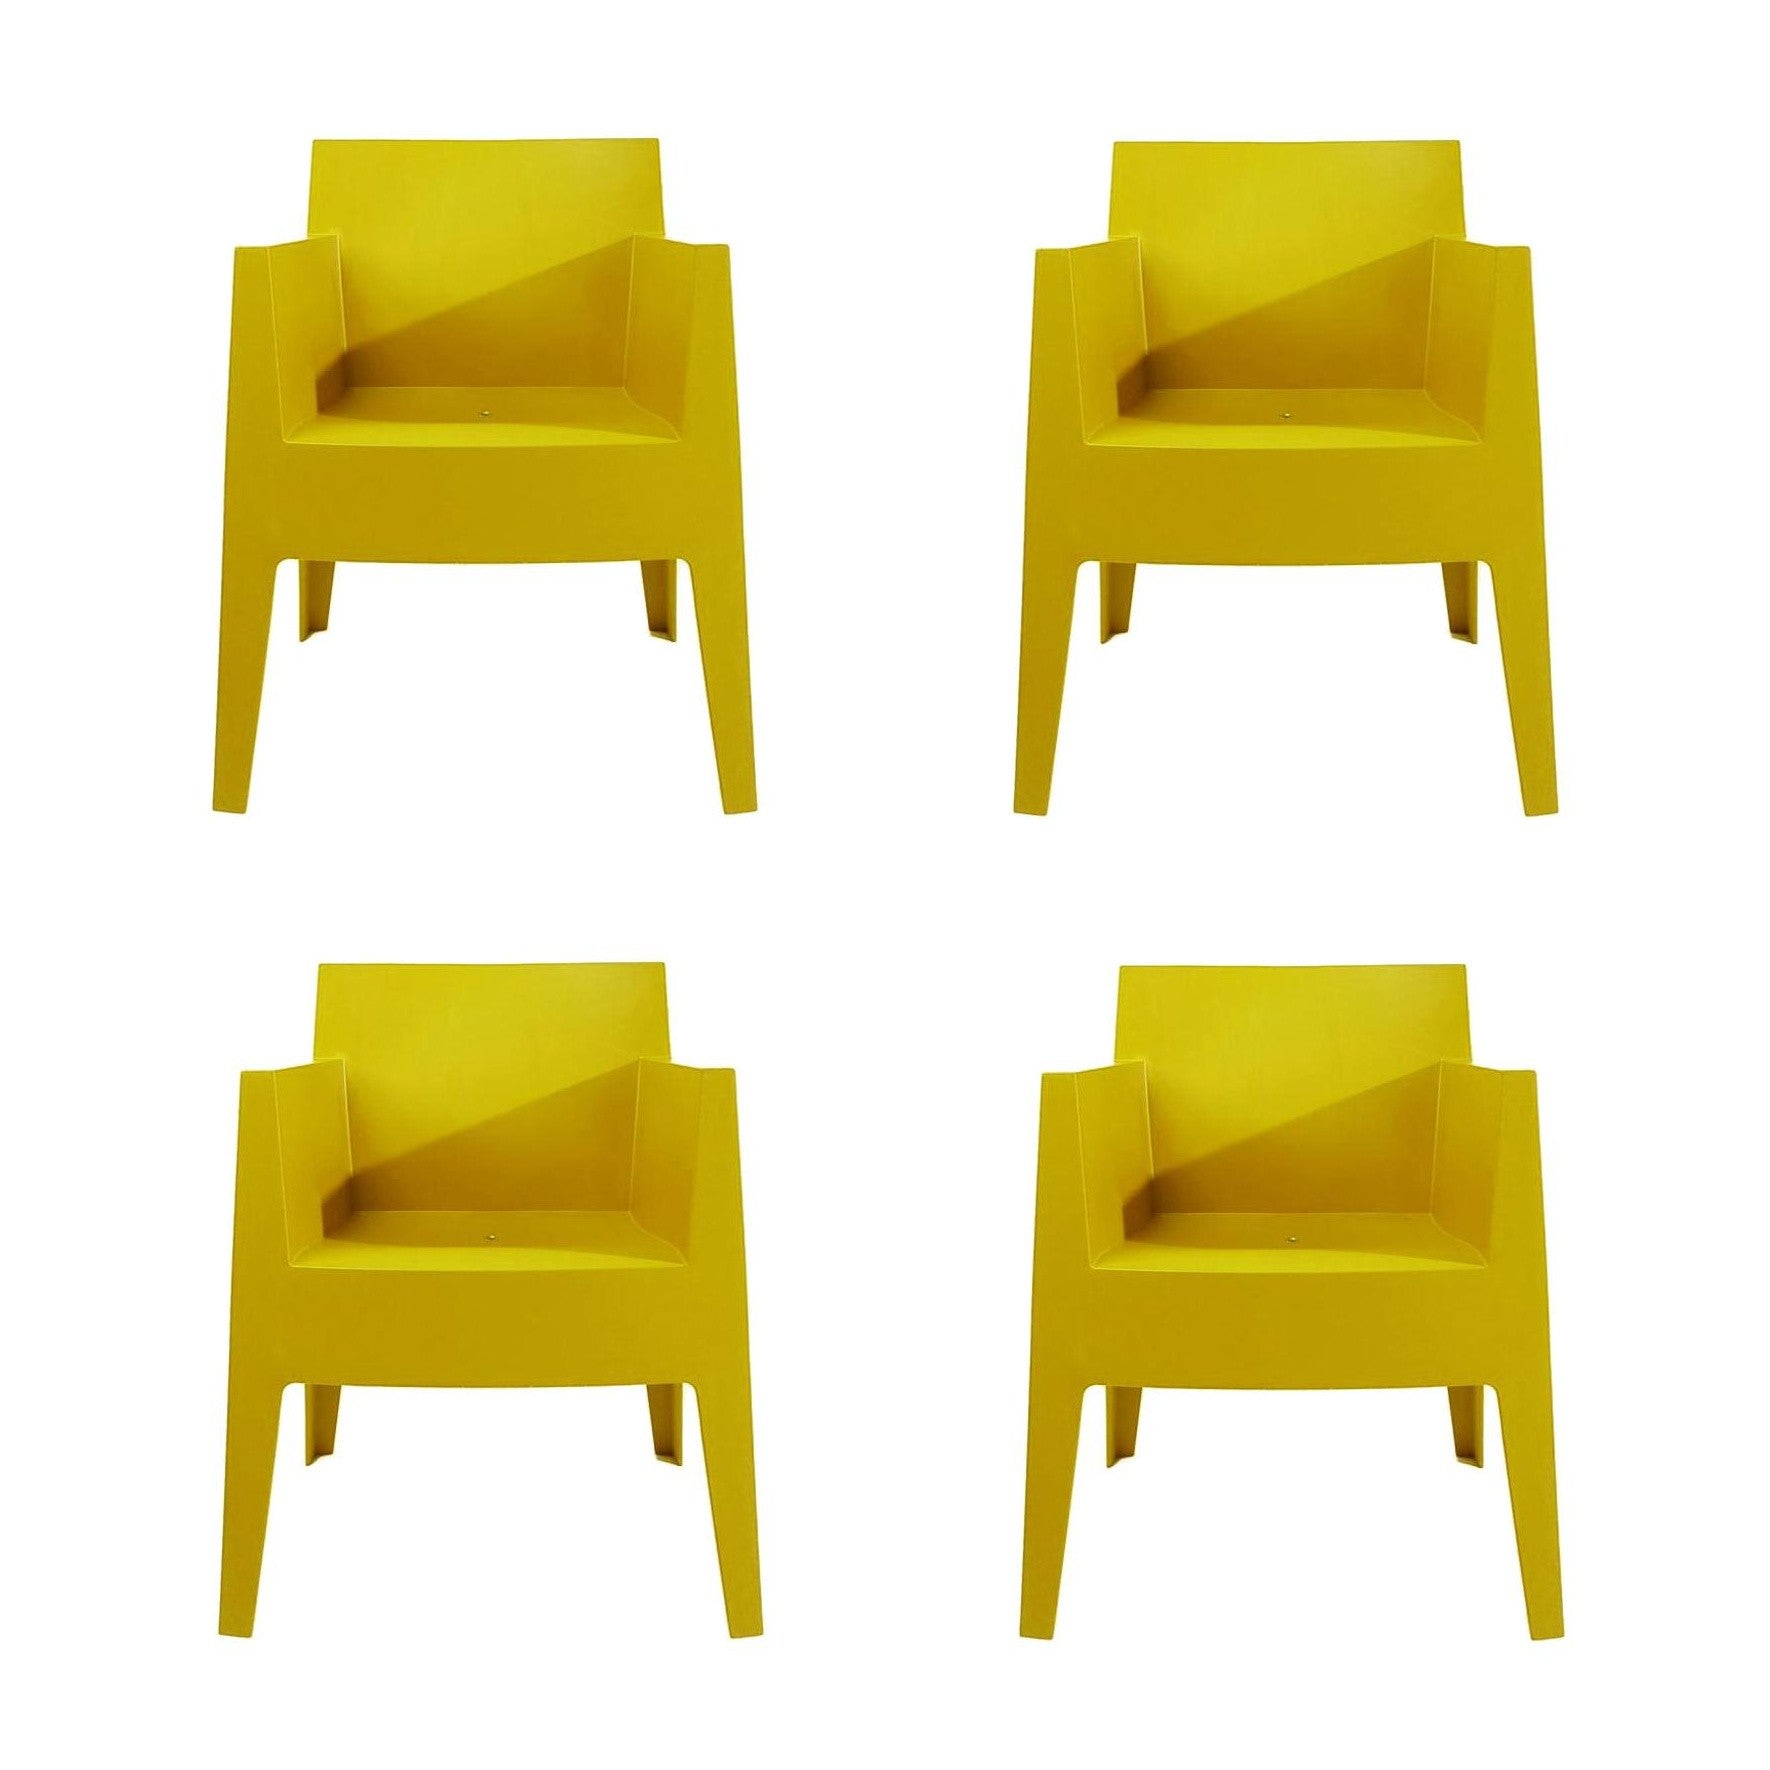 Toy Chair Set Of 4 The Design Part